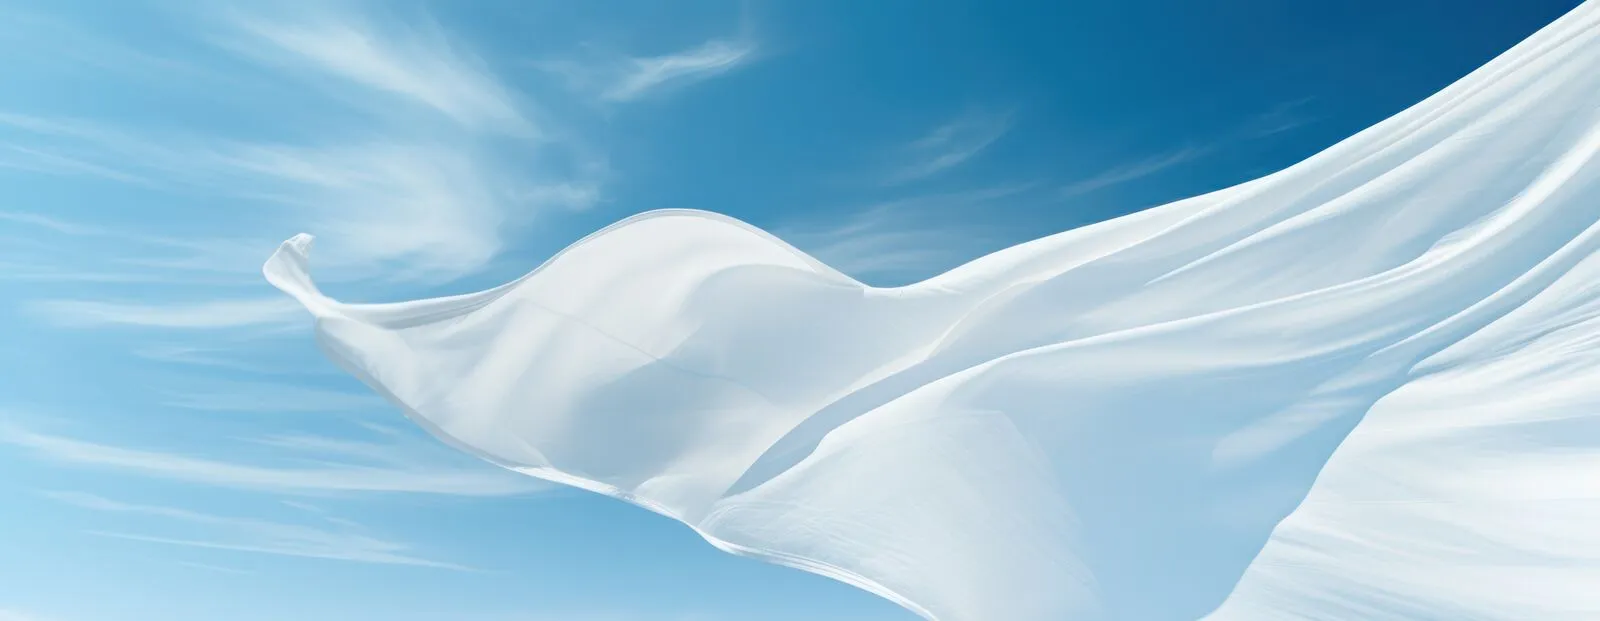 light white fabric flutters in the wind against the blue sky.  (1).jpg